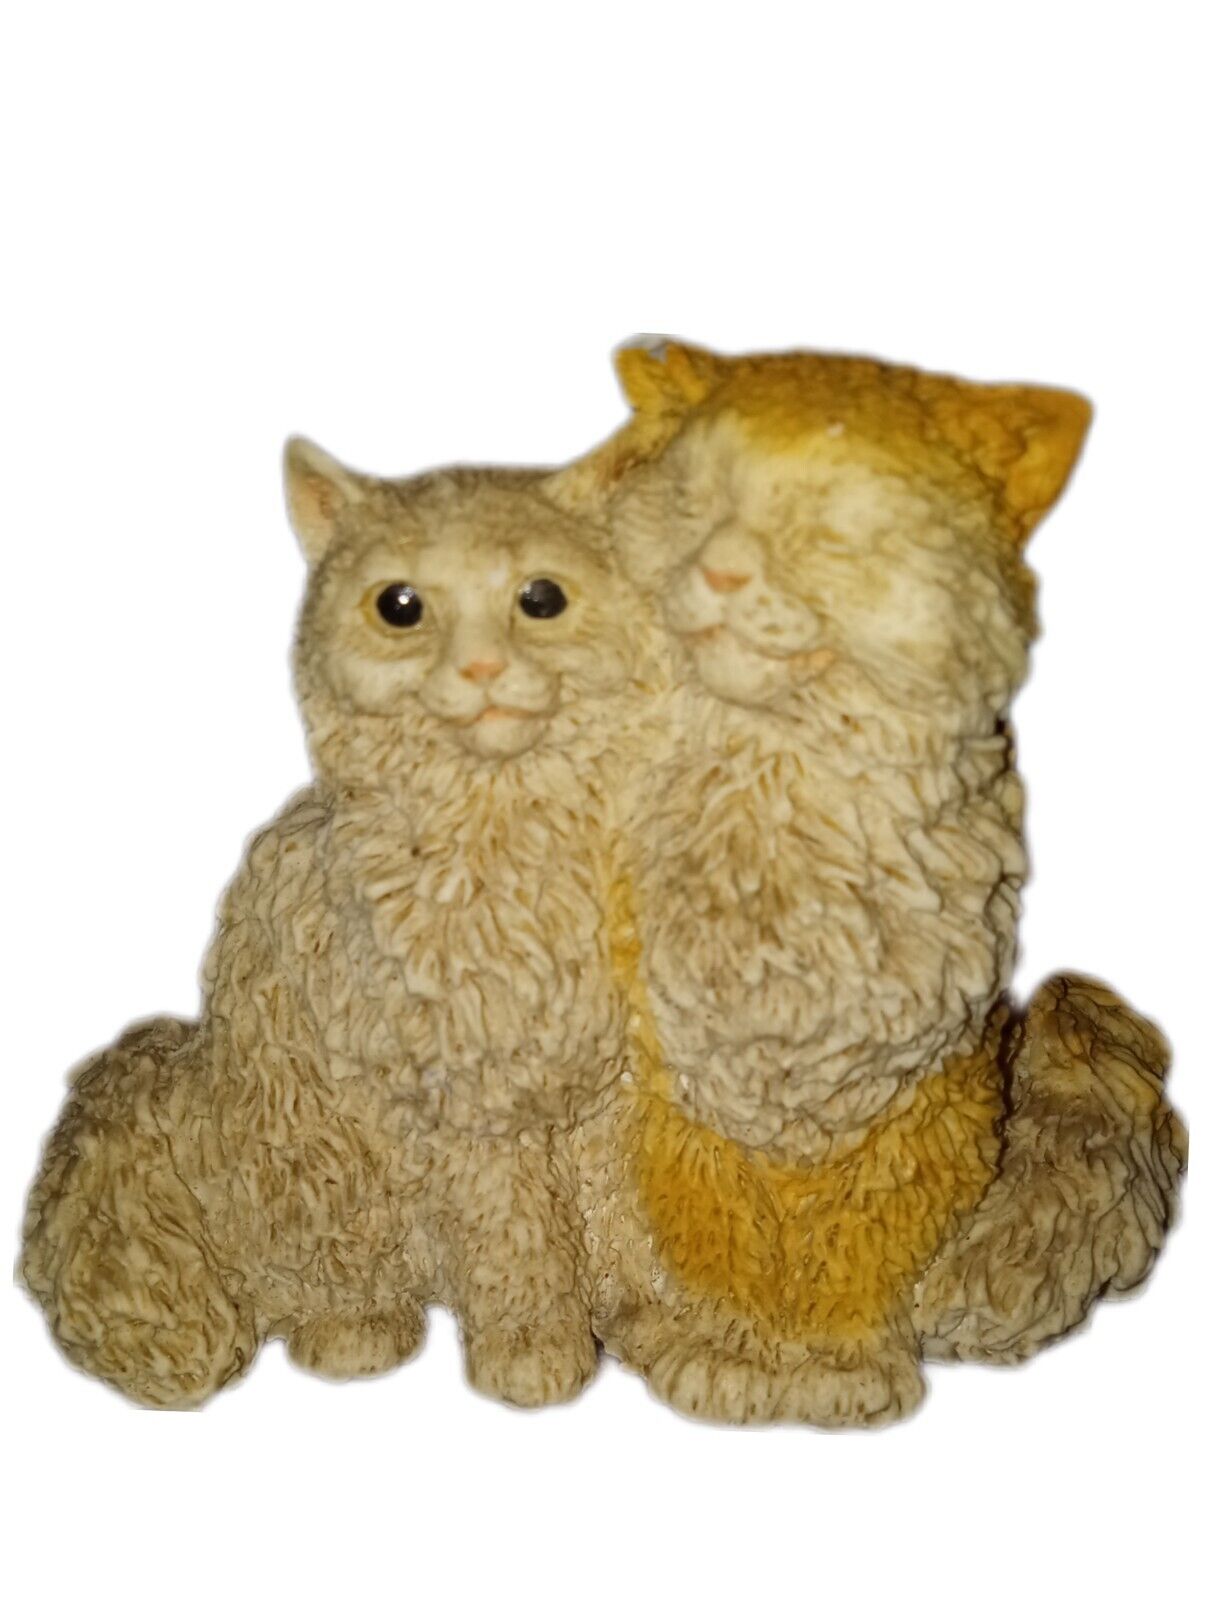 Vintage CASTAGNA Pair  of Cats Figurine Collectible  Made in Italy 1988-1990